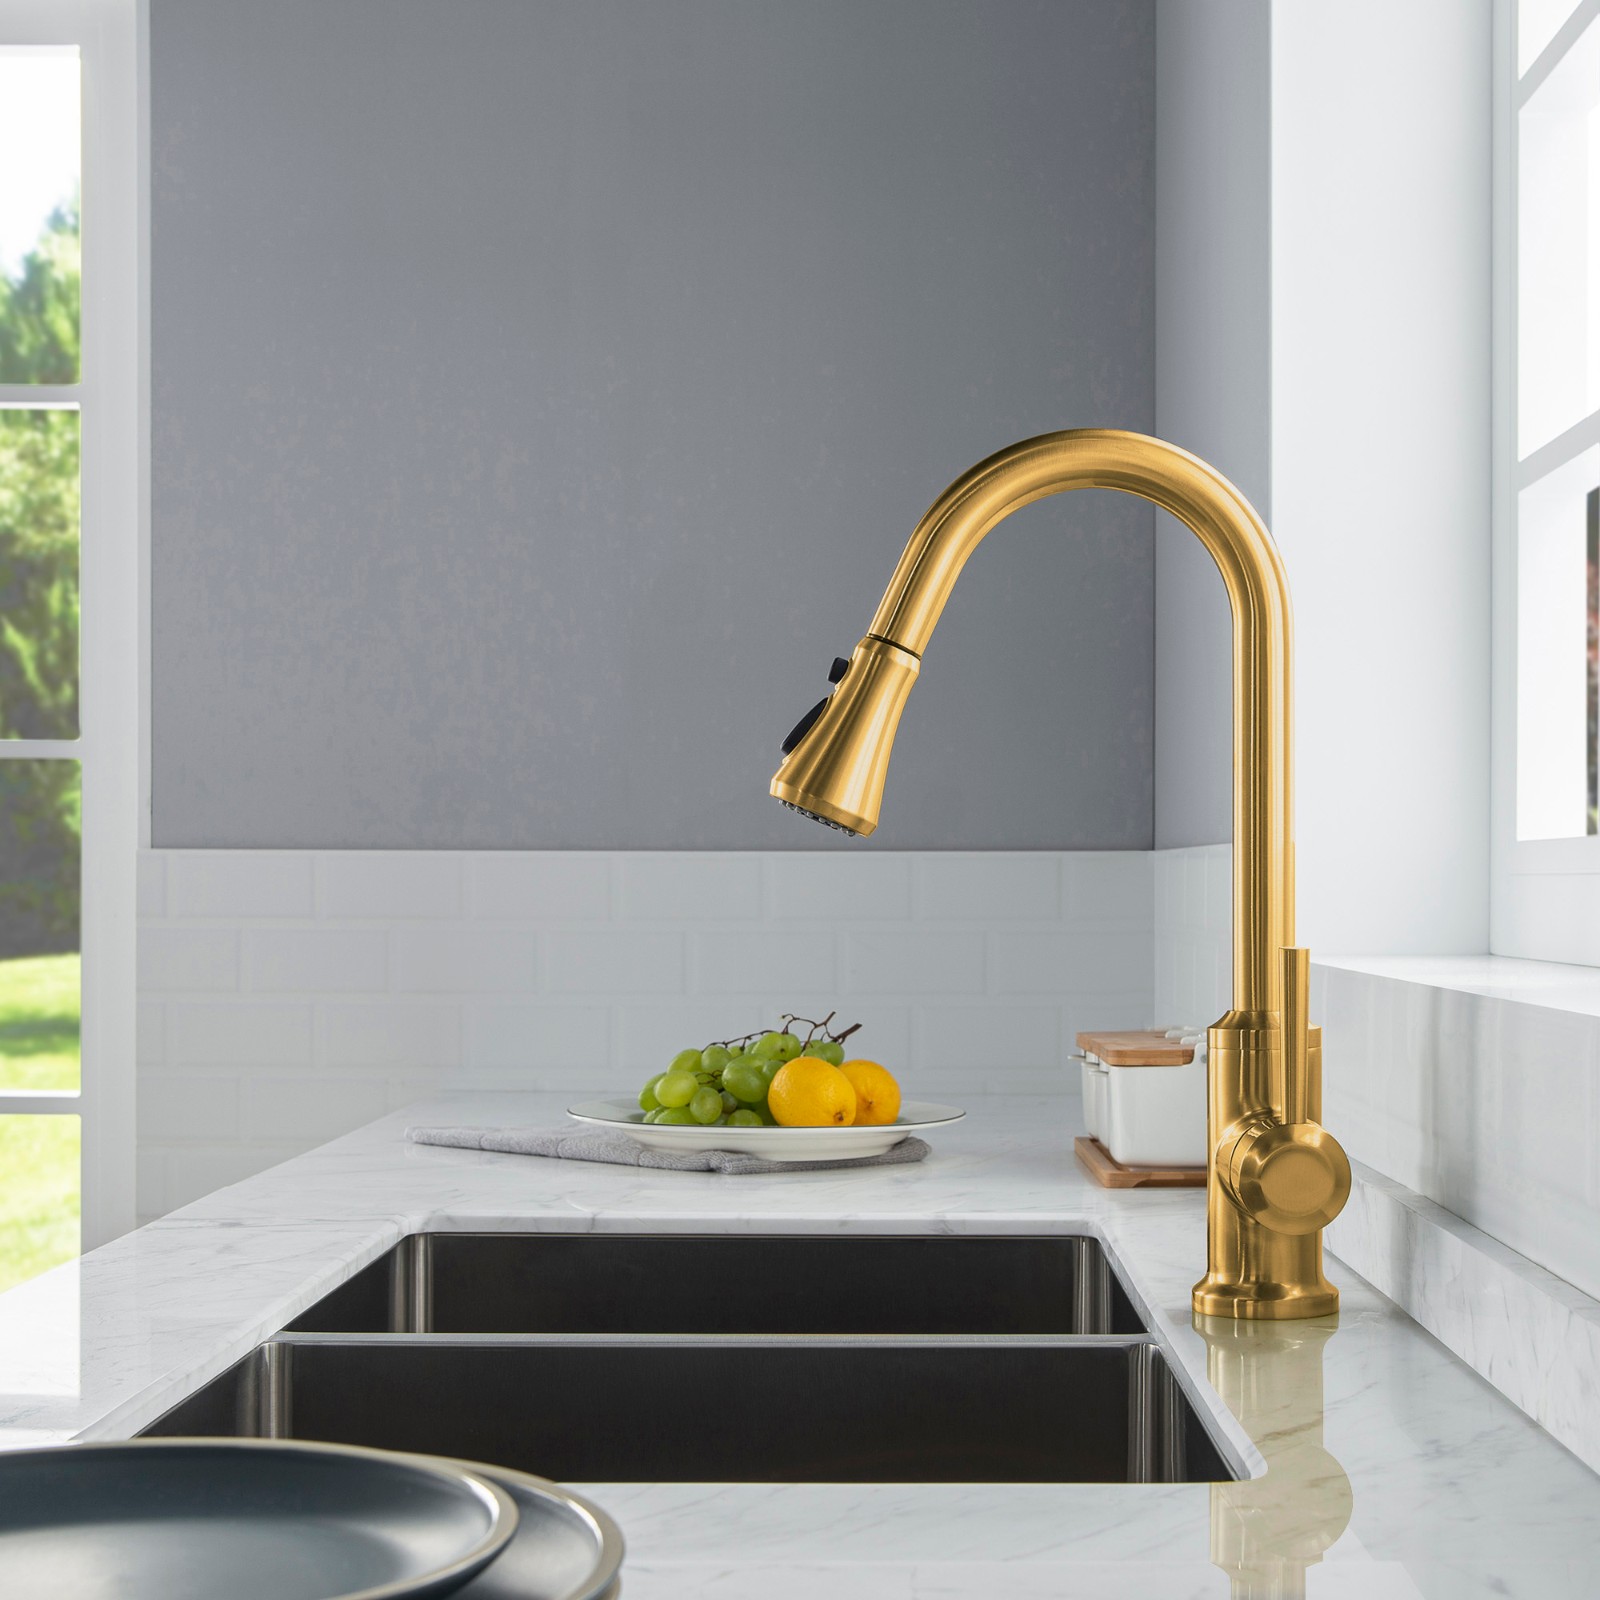  WOODBRIDGE WK101201BG Stainless Steel Single Handle Pull Down Kitchen Faucet in Brushed Gold Finish._4993